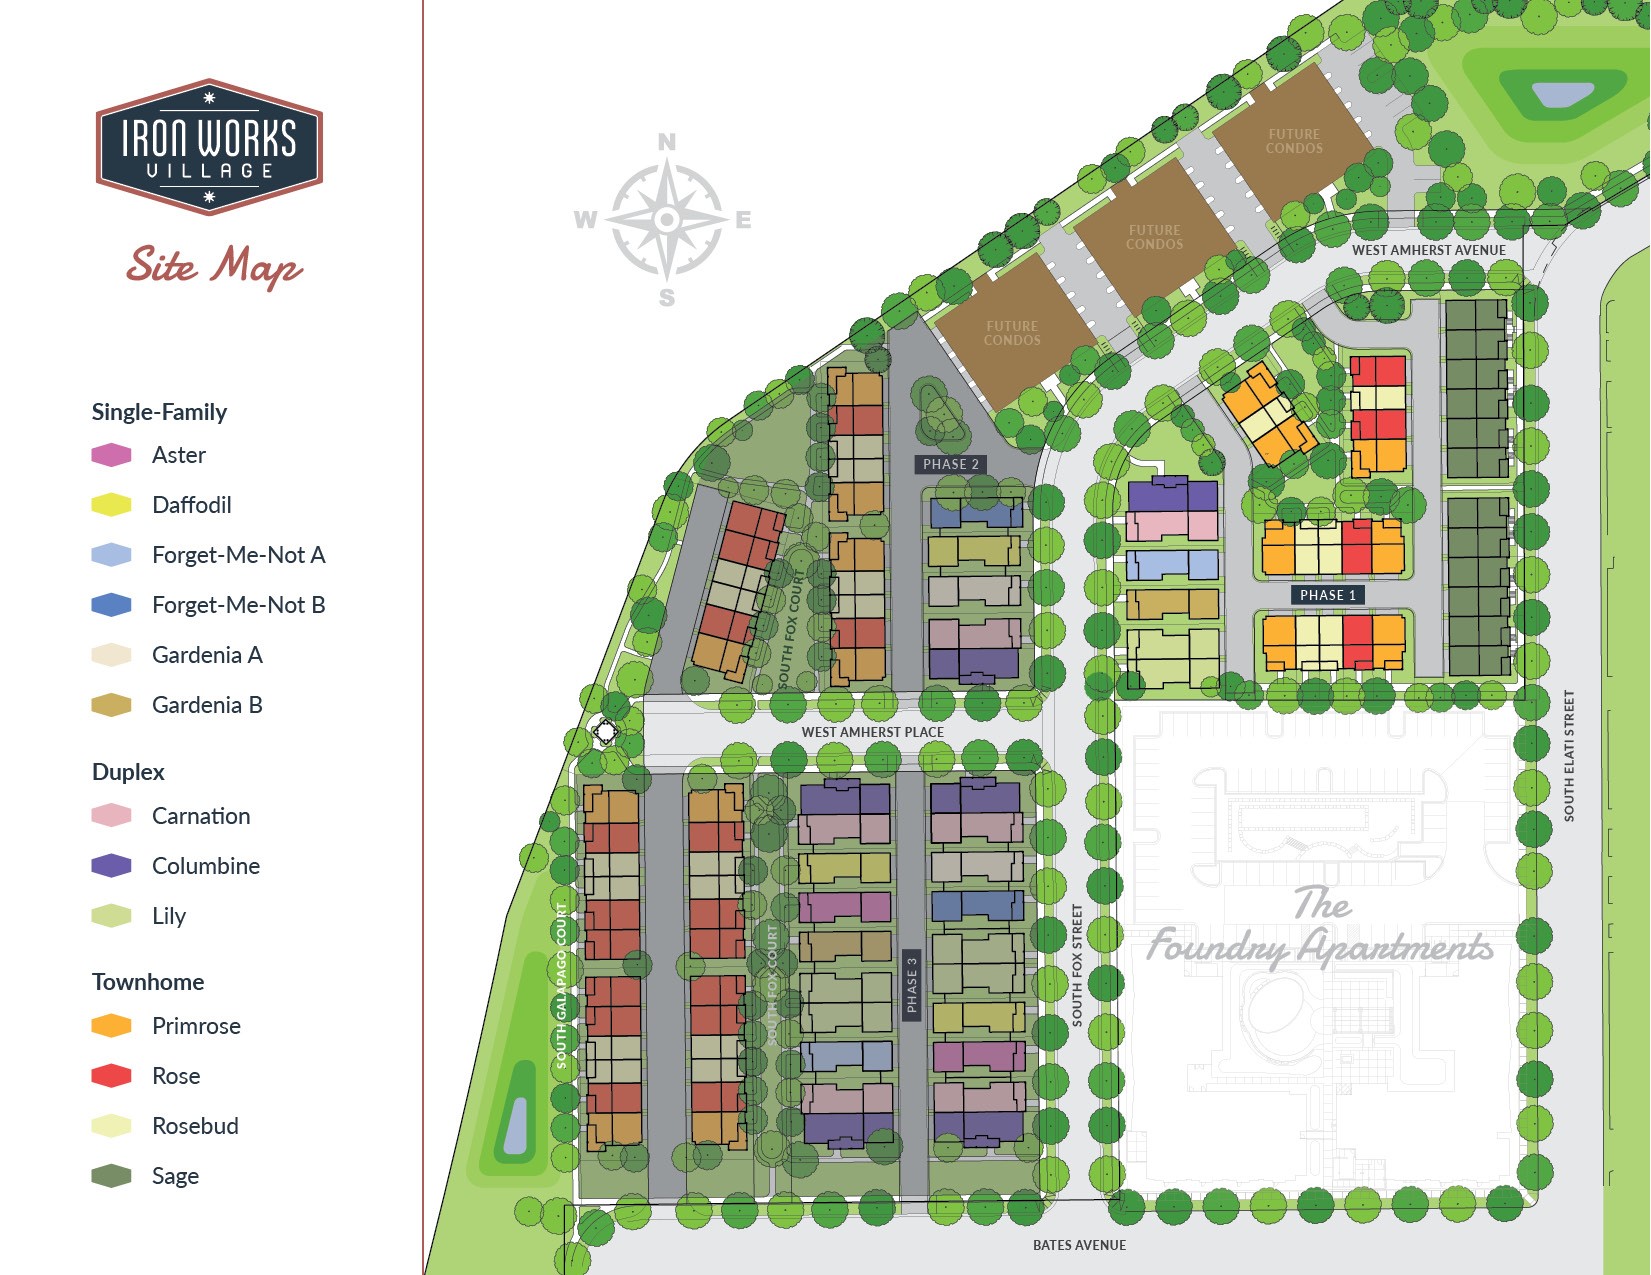 Iron Works Village - 136 Homes Come To Englewood